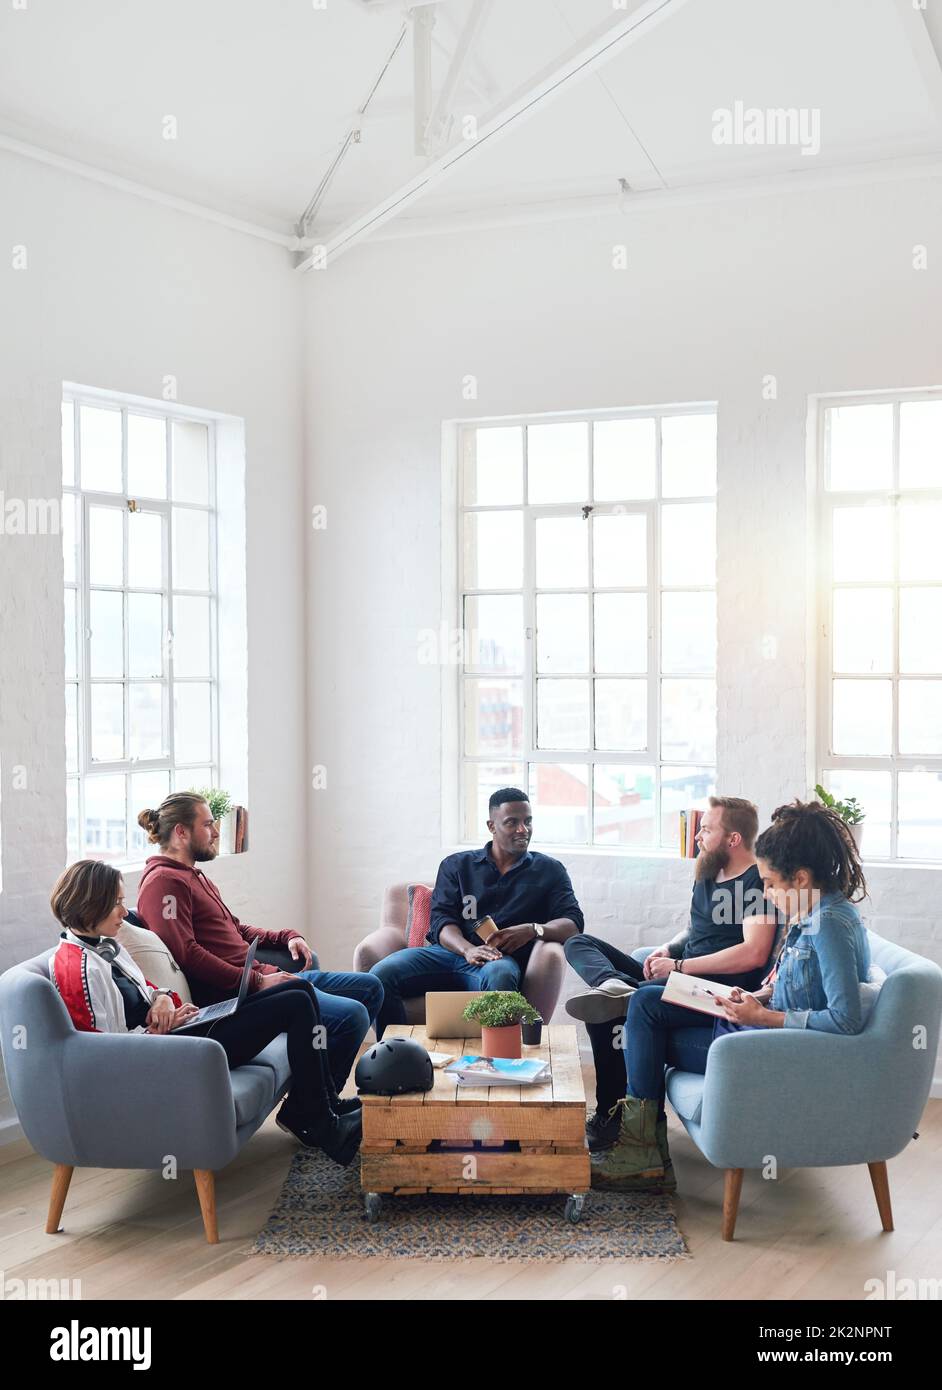 study group college students meeting working on project brainstorming creative ideas together Stock Photo